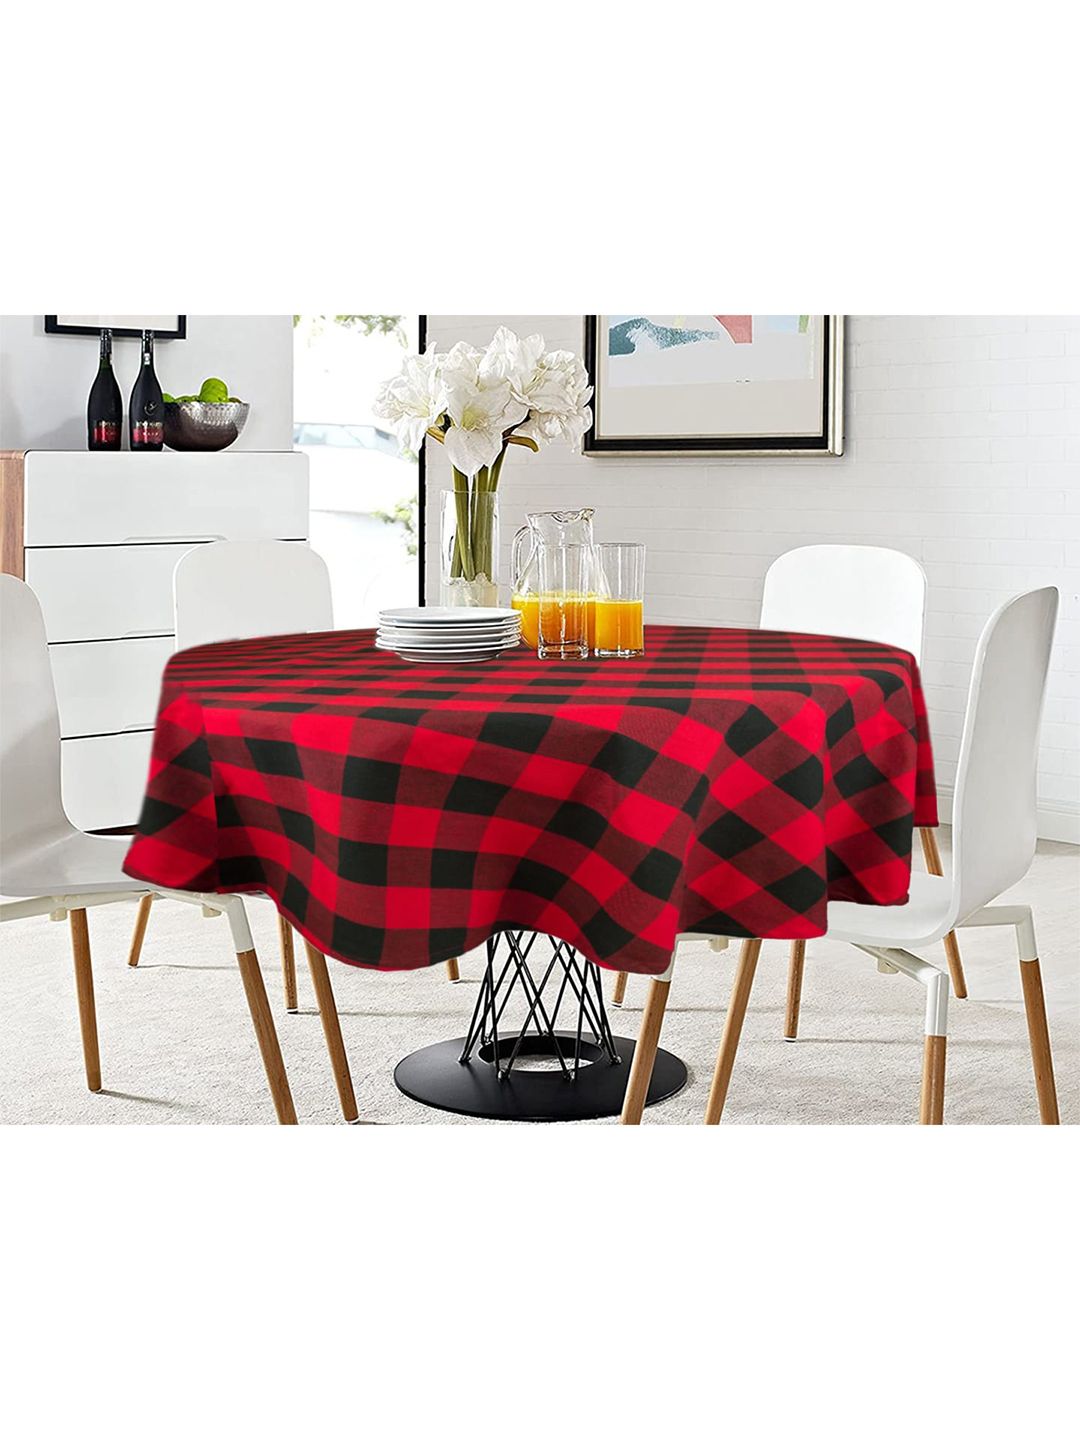 Lushomes Red & Black Buffalo Checks Plaid Dining Table Cover Price in India